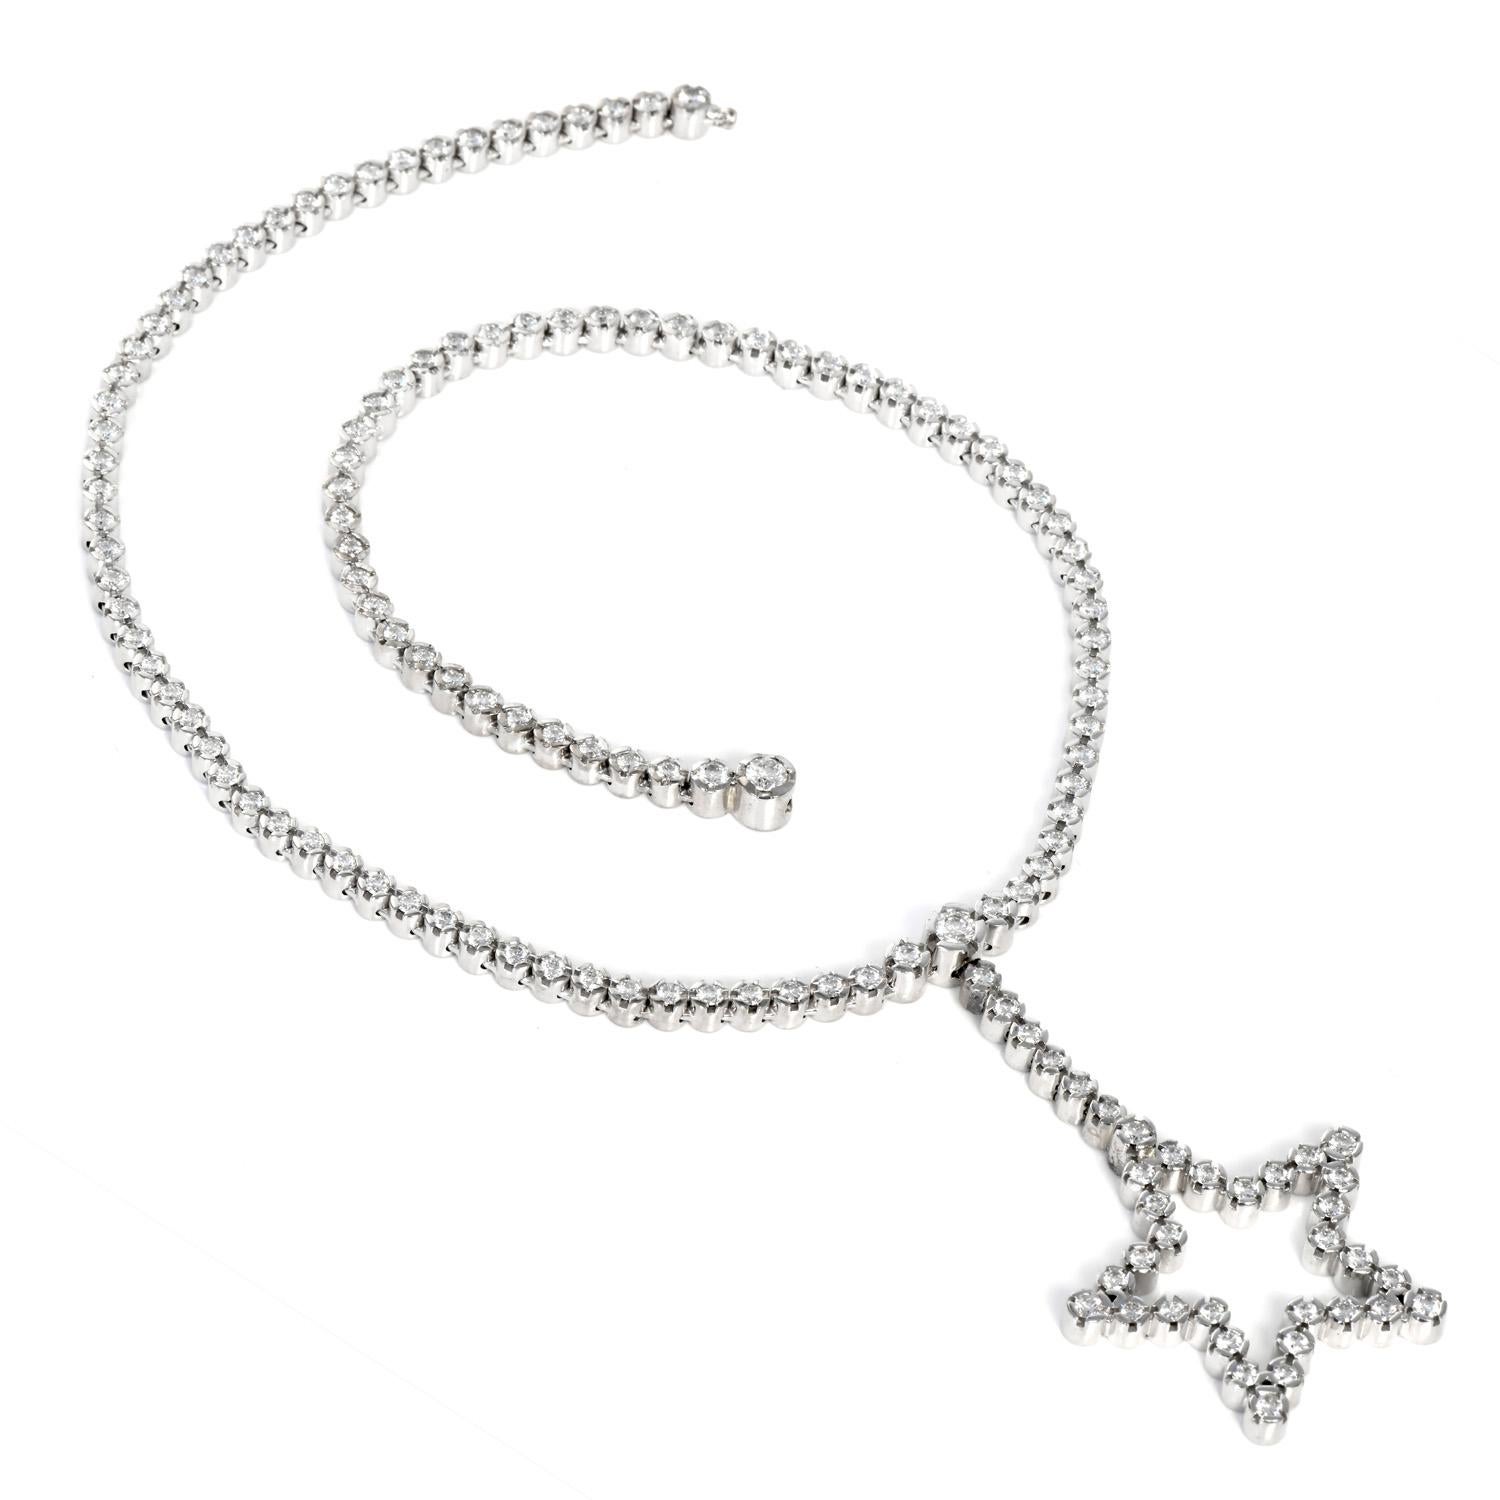 This Link Diamond Necklace was inspired with Elegance and Celebration in mind. With a large center star, It is crafted in 18K White Gold. 

This Dazzling piece is All-occasion wear, its total necklace length without its drop is 16.5 inches and its